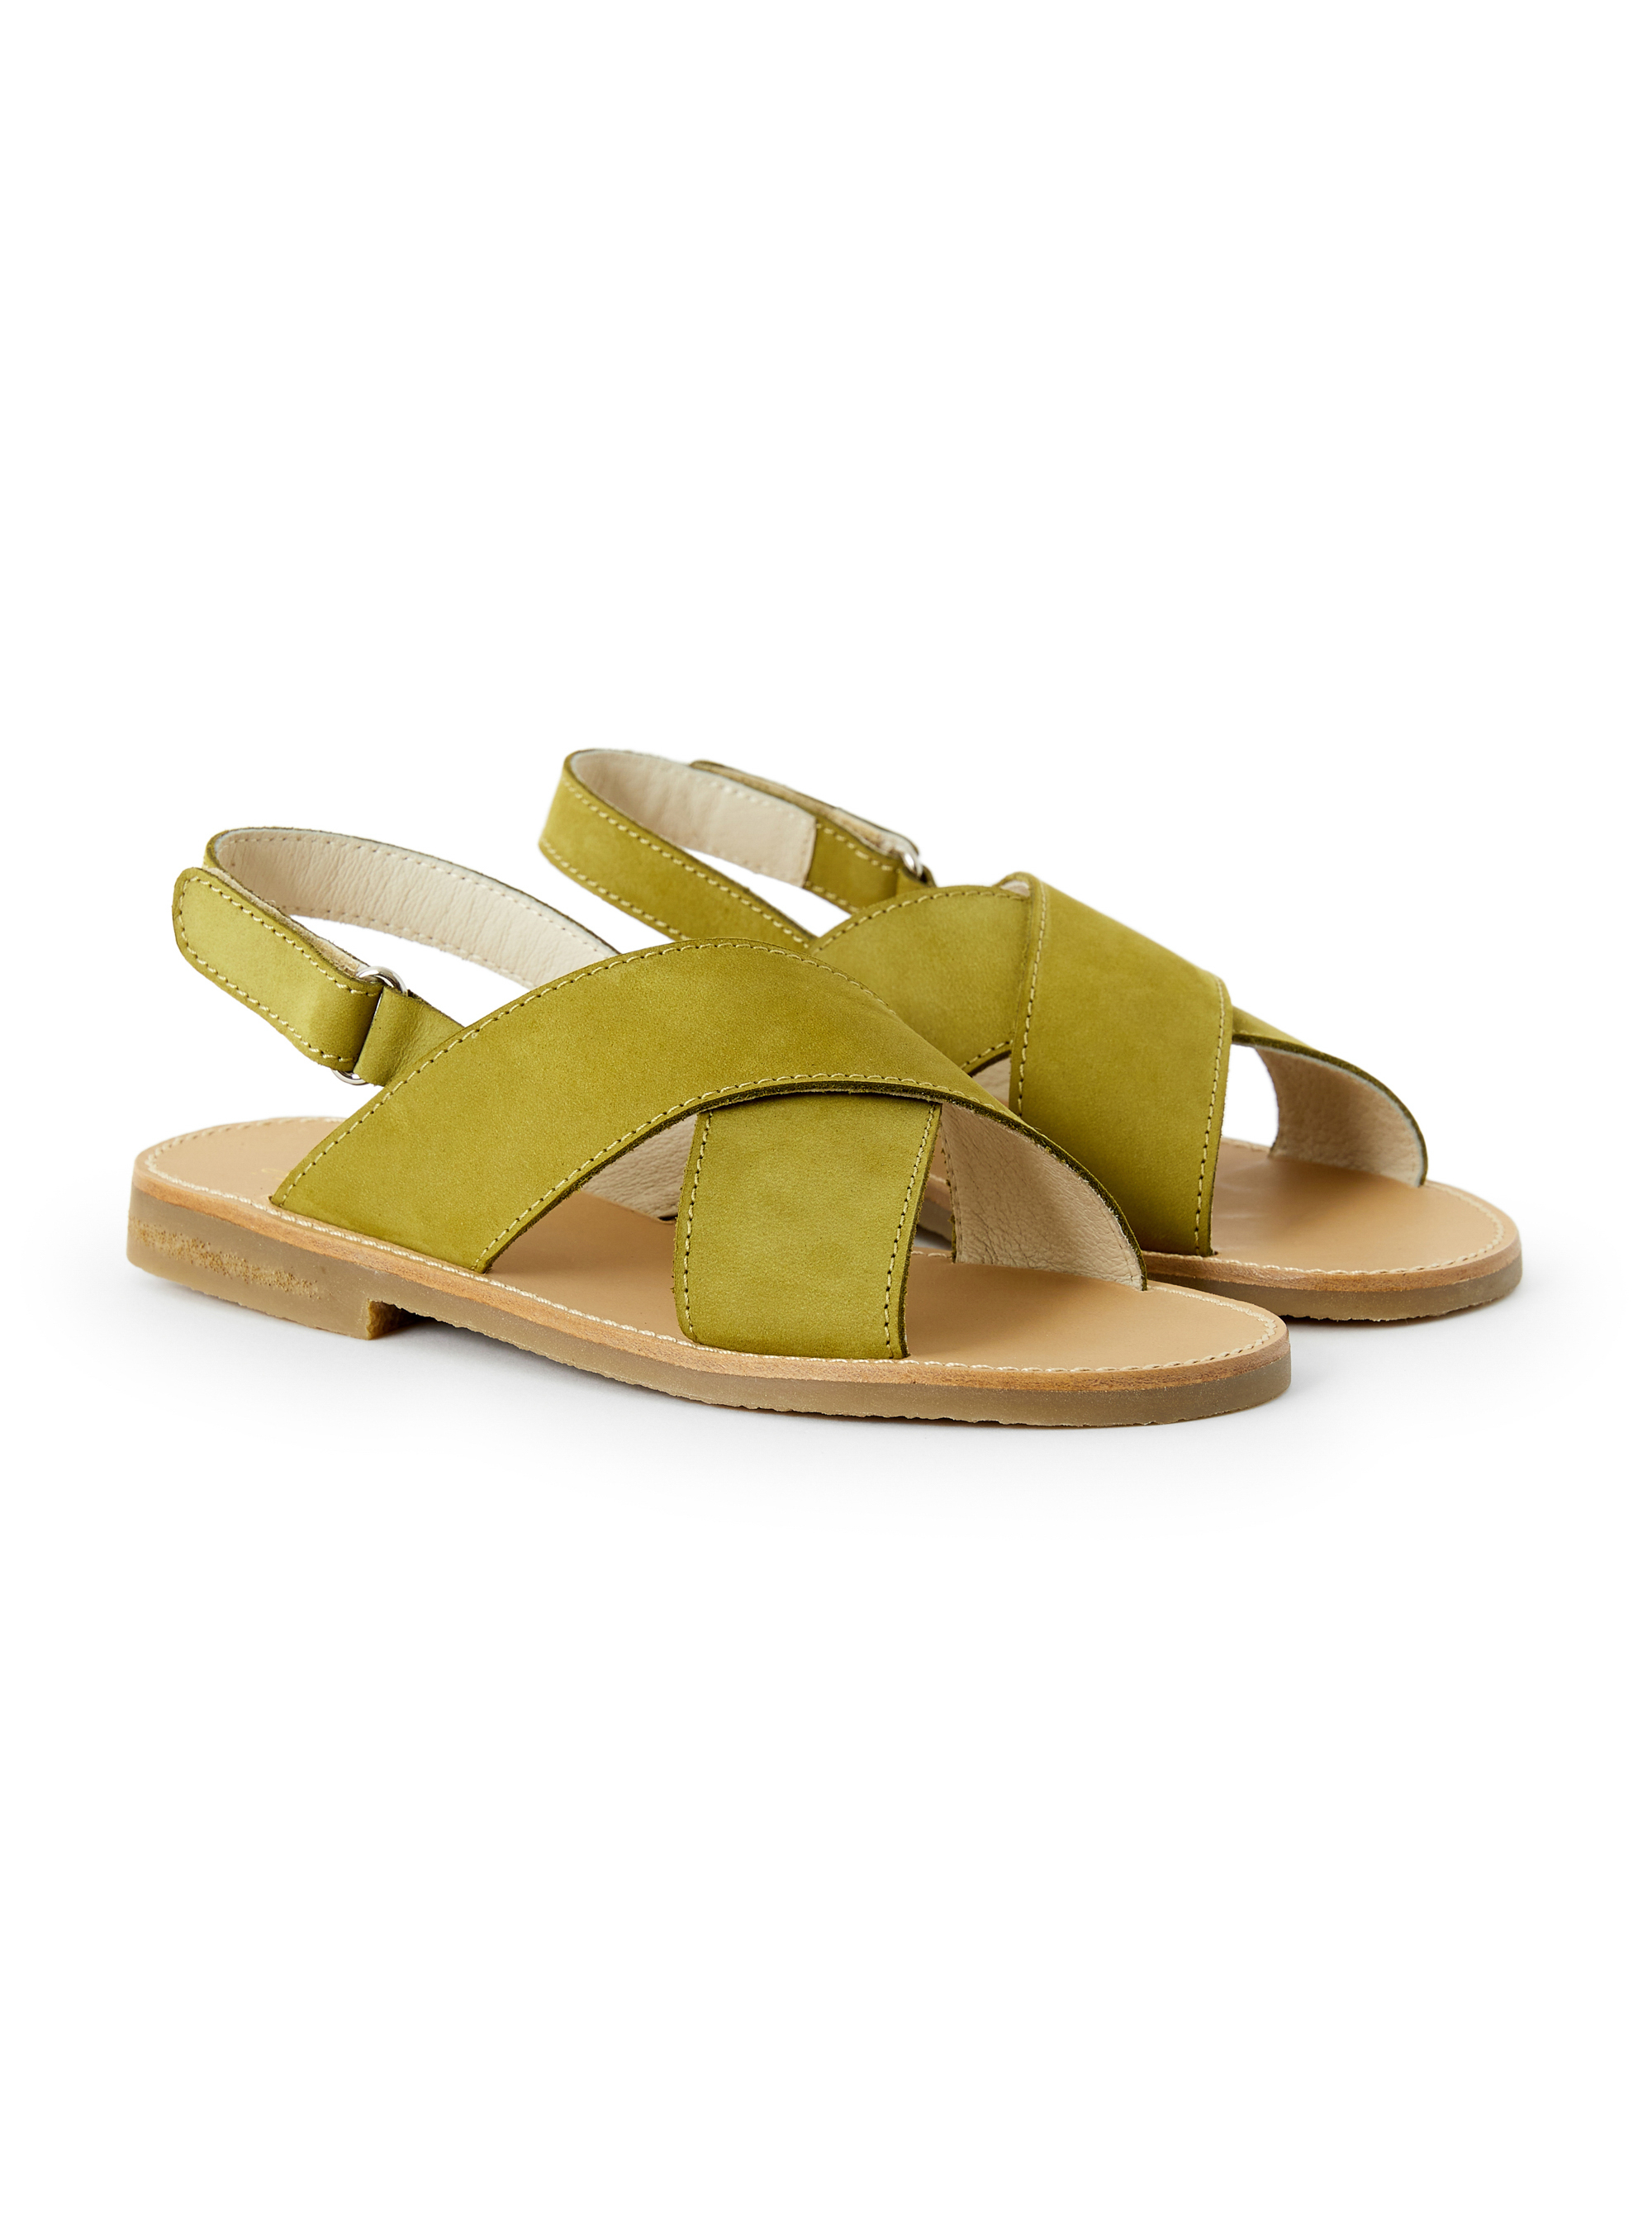 Green sandal with crossed bands - Shoes - Il Gufo